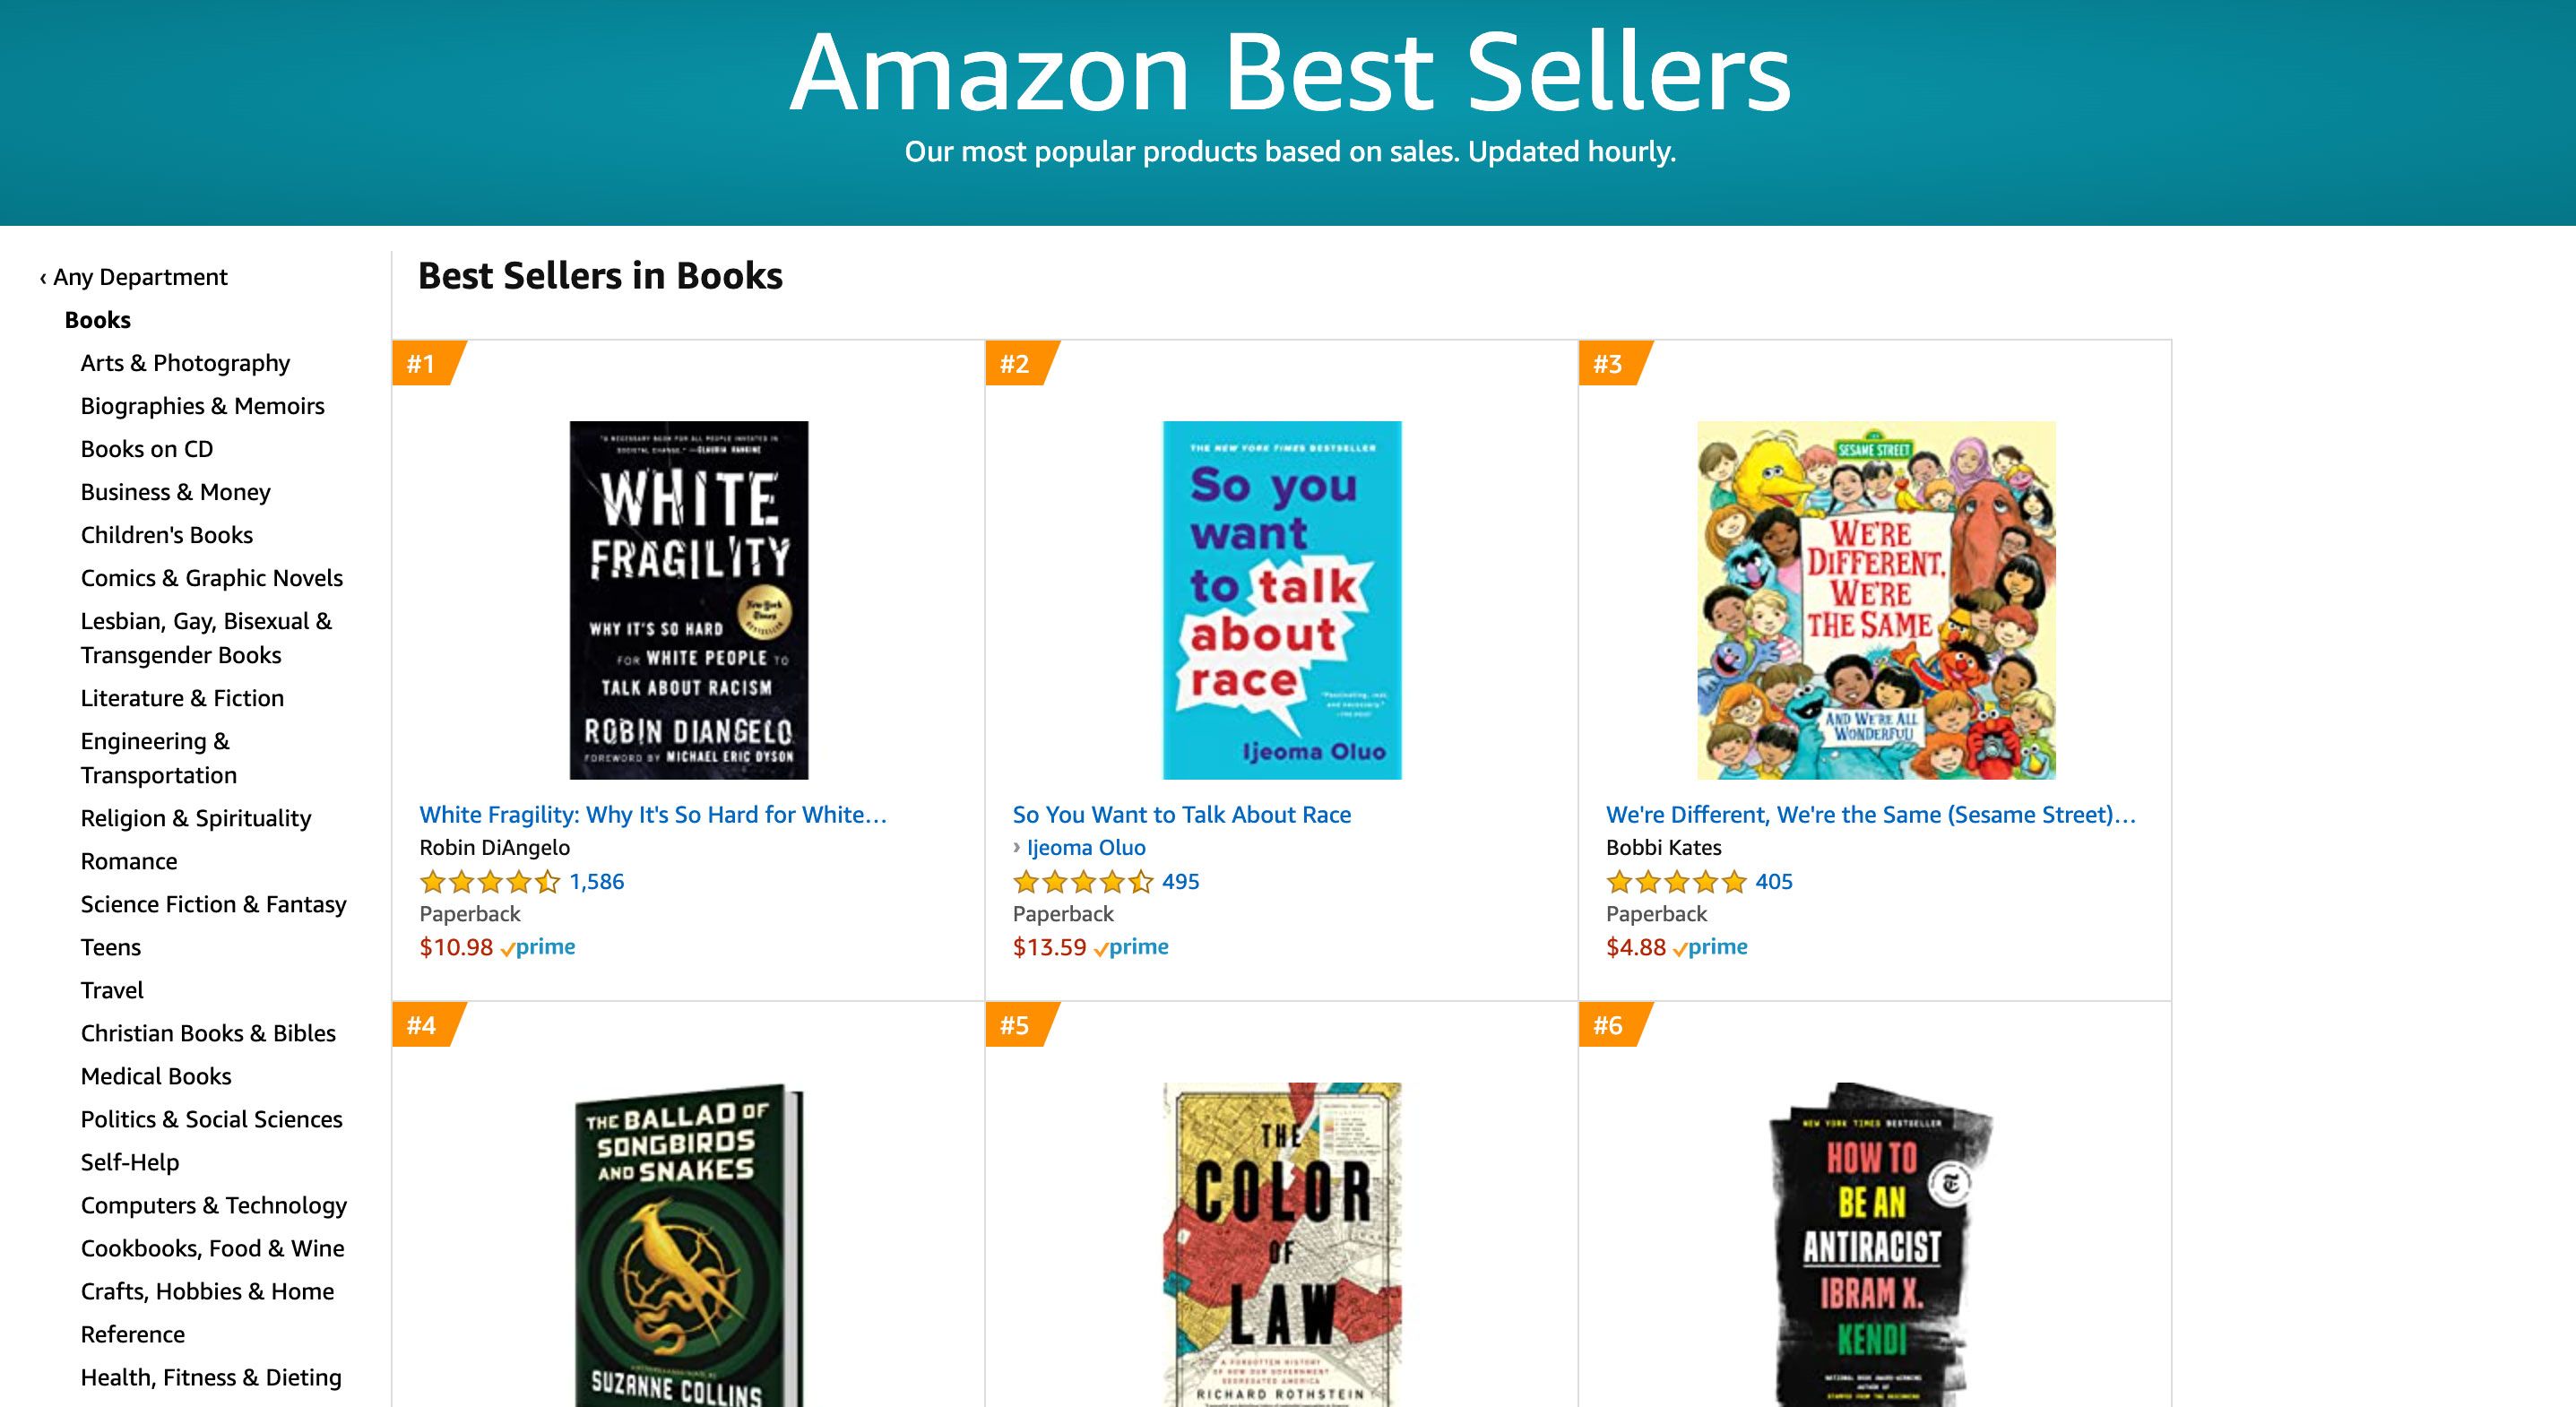 s best sellers list is dominated almost entirely by books